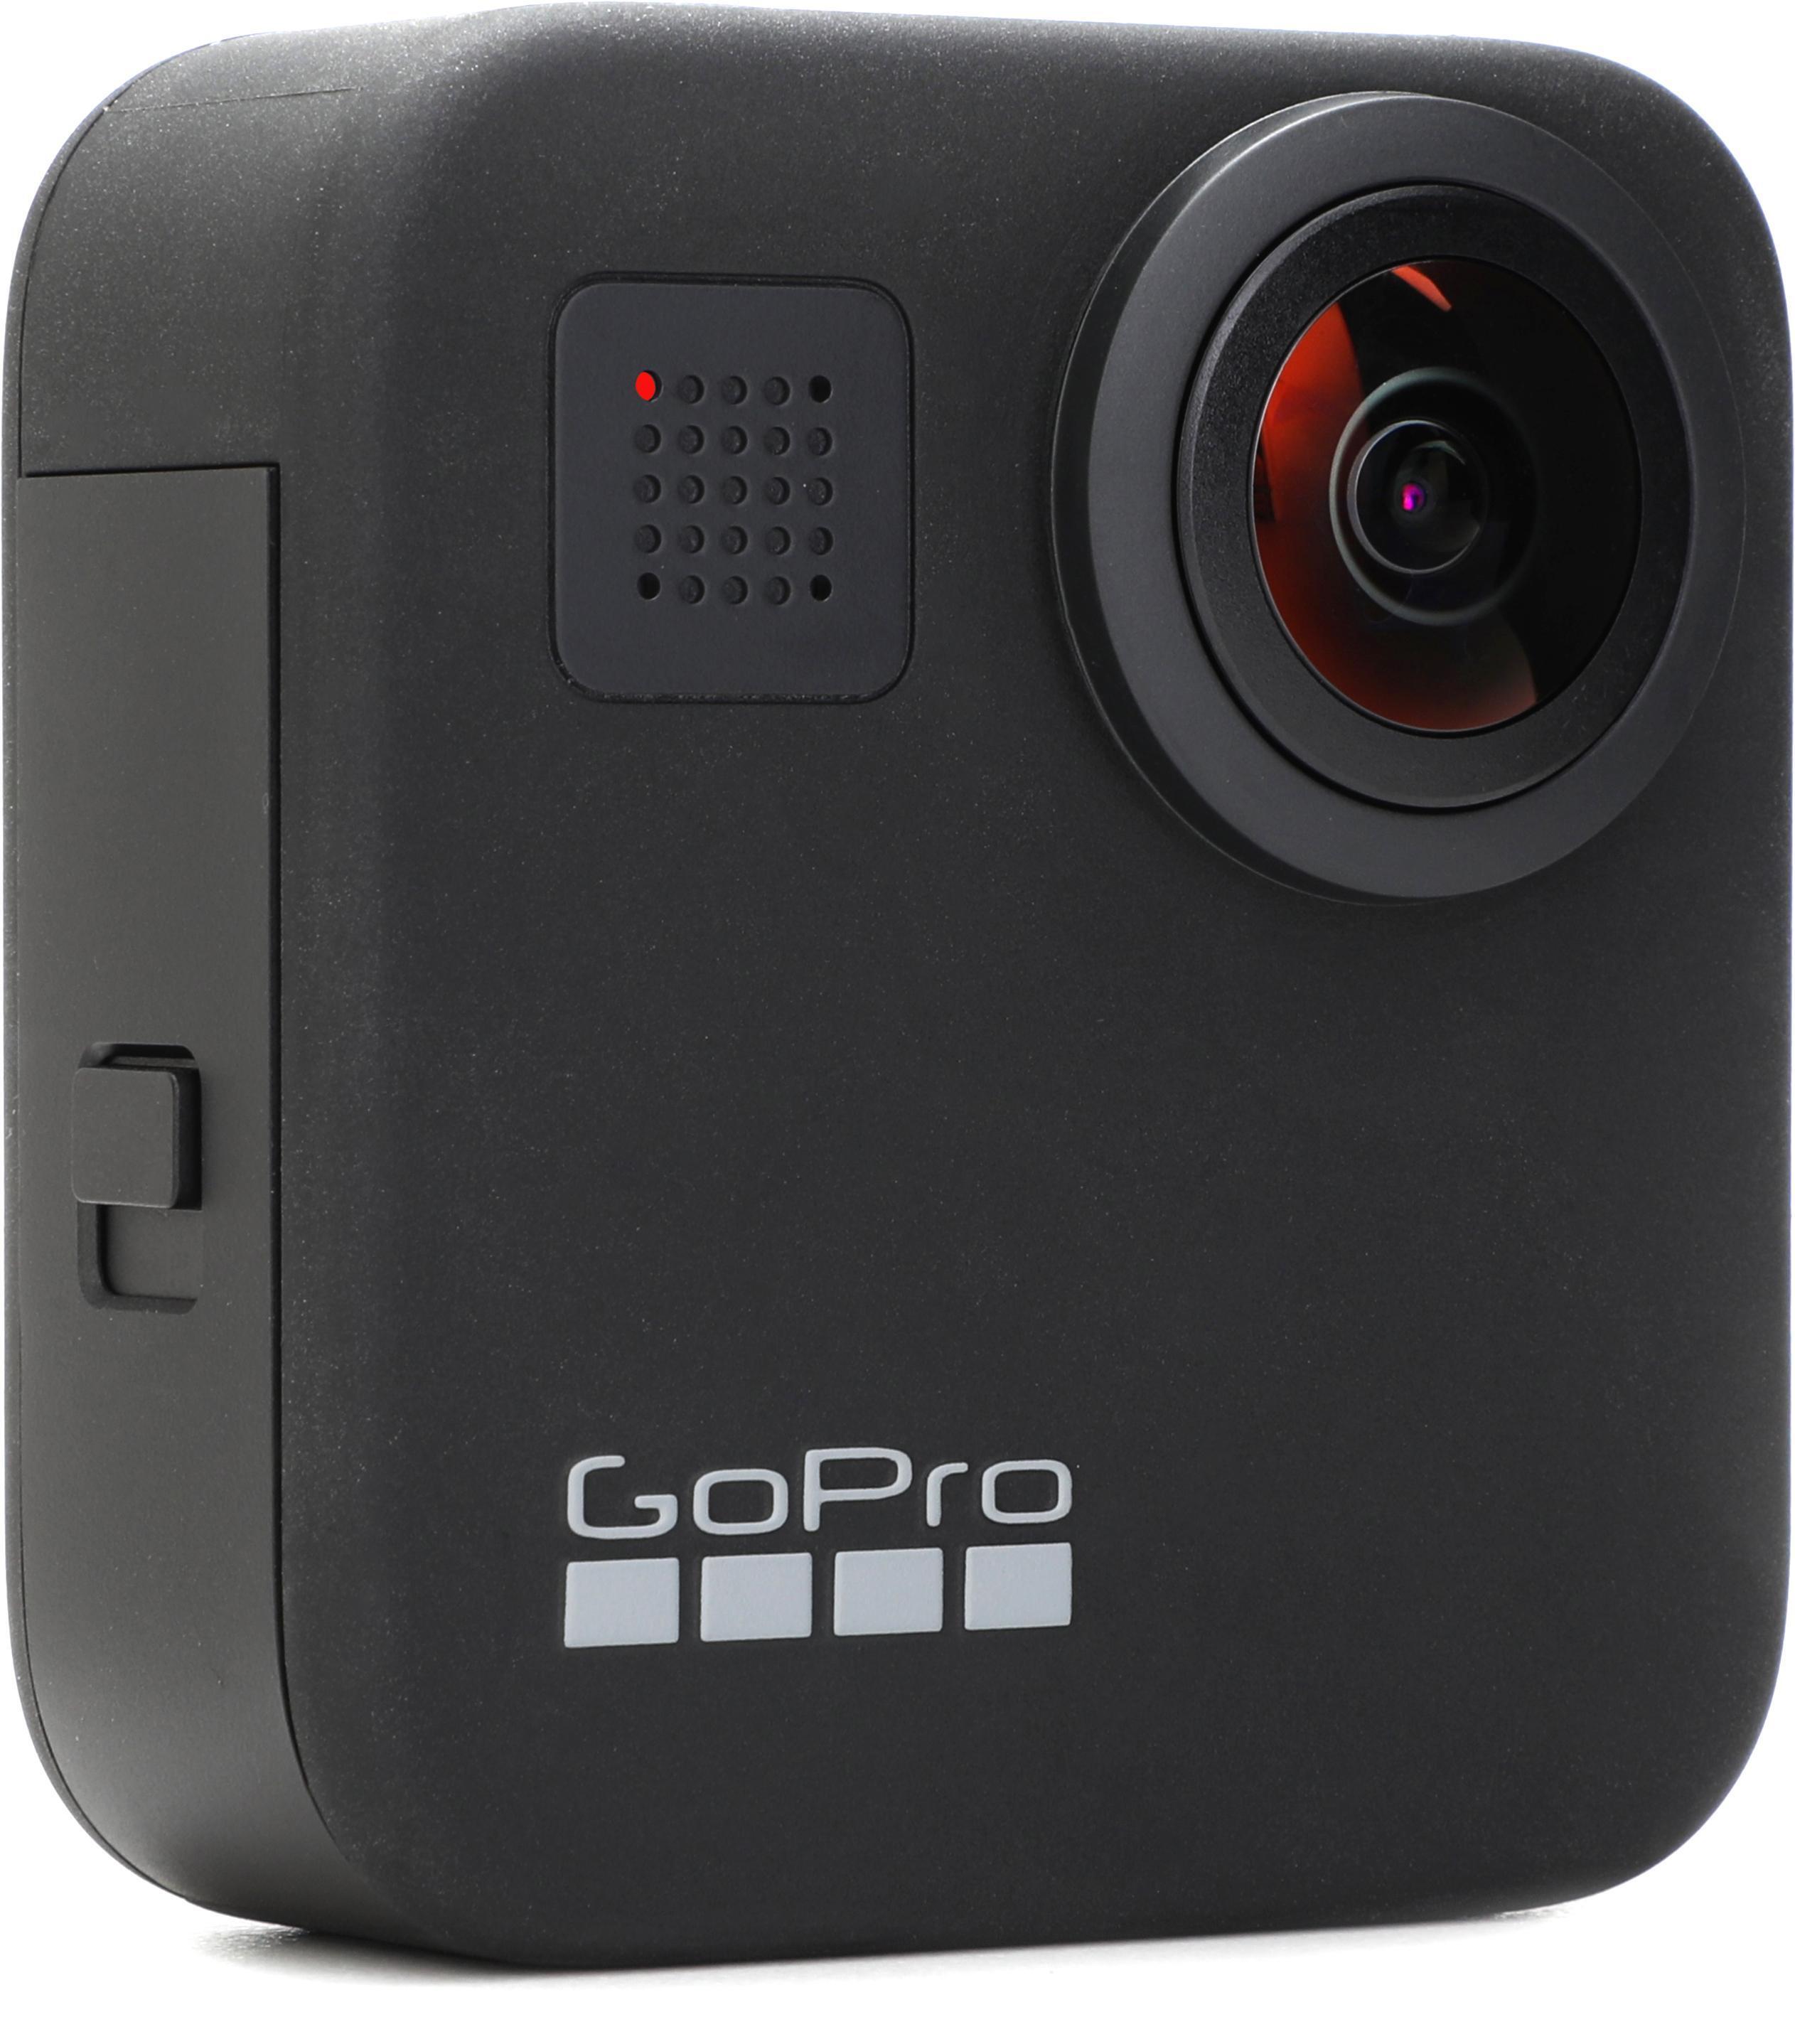 GoPro Max review: We put the 360-degree action cam to the test